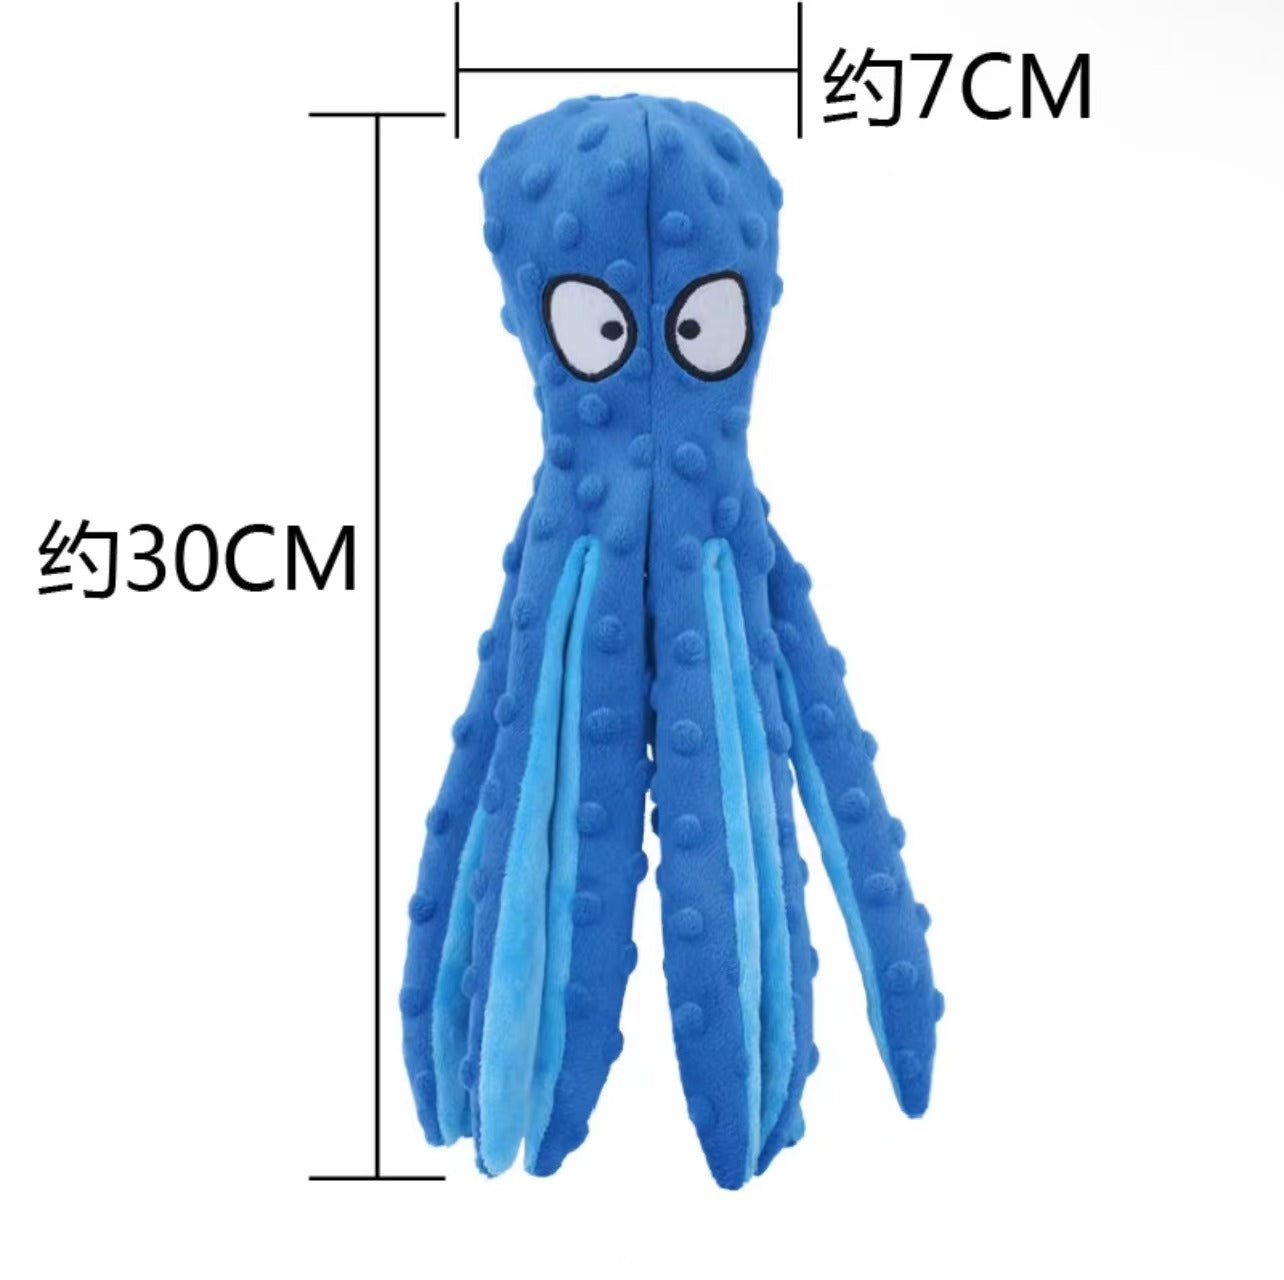 New pet plush toy Octopus shell